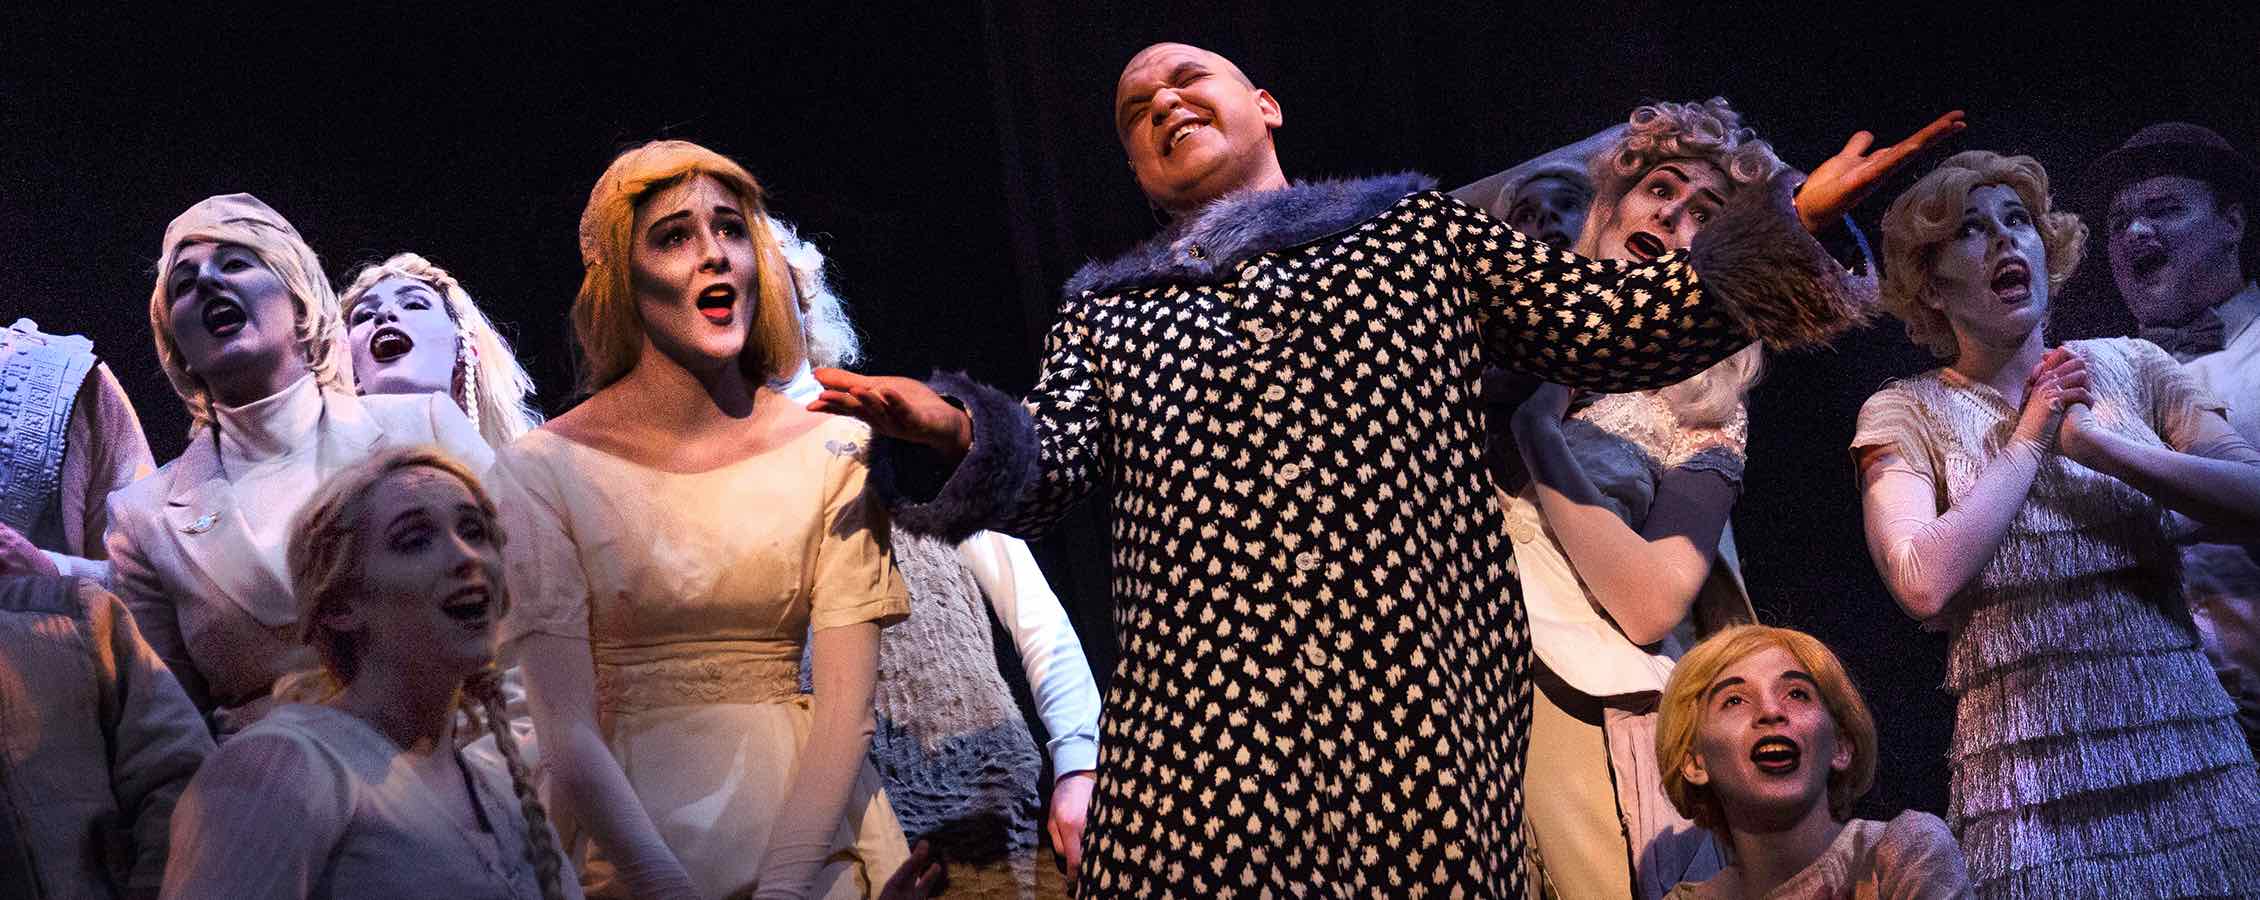 Nahuel Recoba, a music major from DeForest, shines as Uncle Fester, here surrounded by Addams family ghosts. The Addams Family Musical is this year's spring production, an annual collaboration between the theatre/dance and music departments.